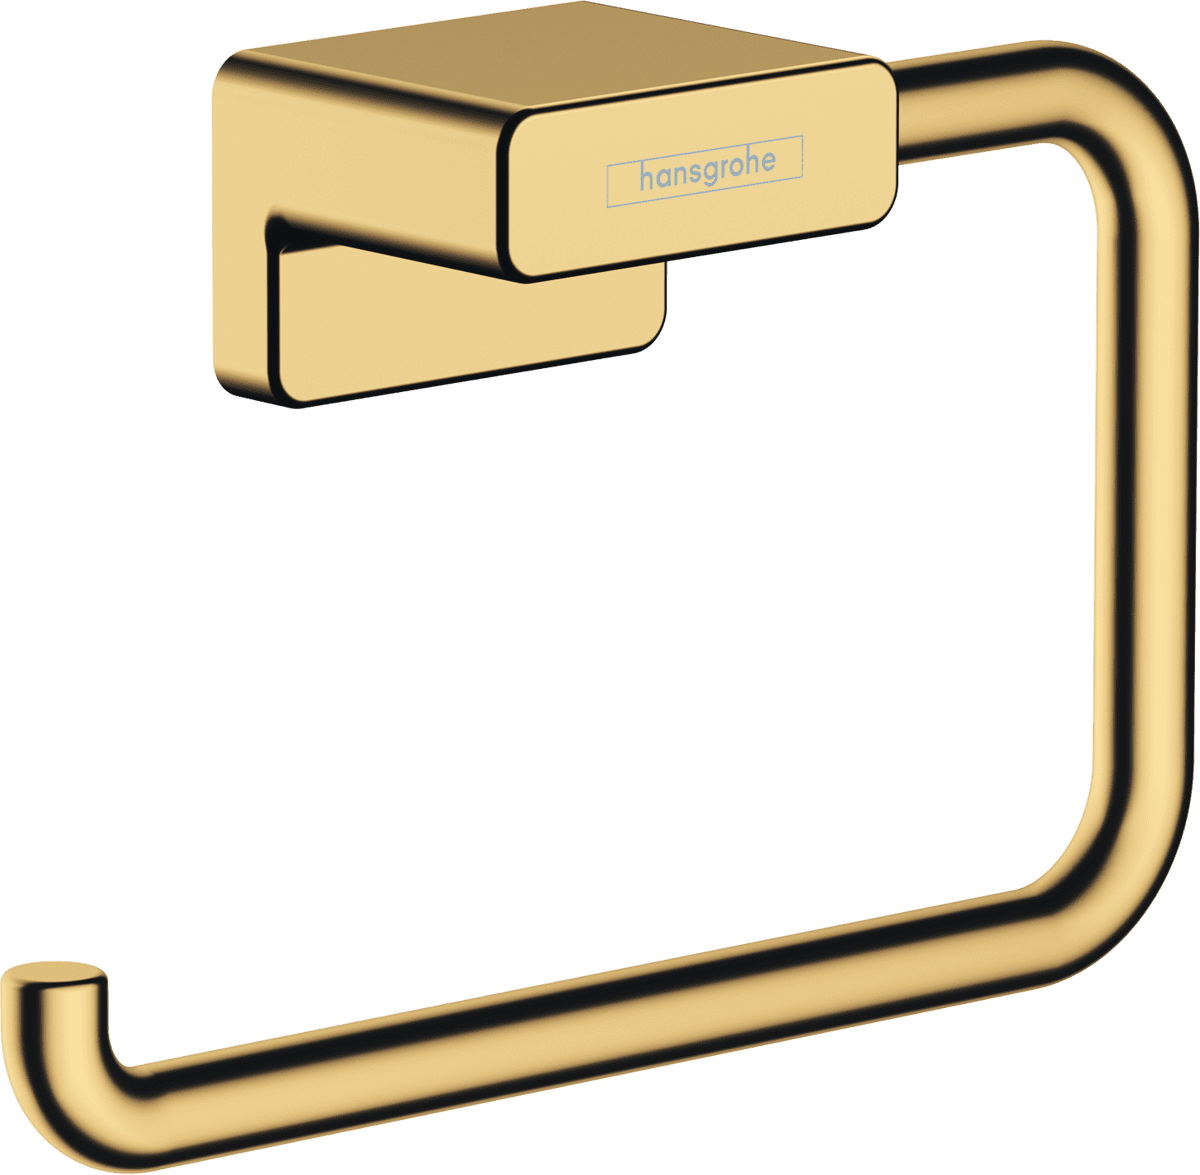 Picture of HANSGROHE AddStoris Toilet paper holder #41771990 - Polished Gold Optic